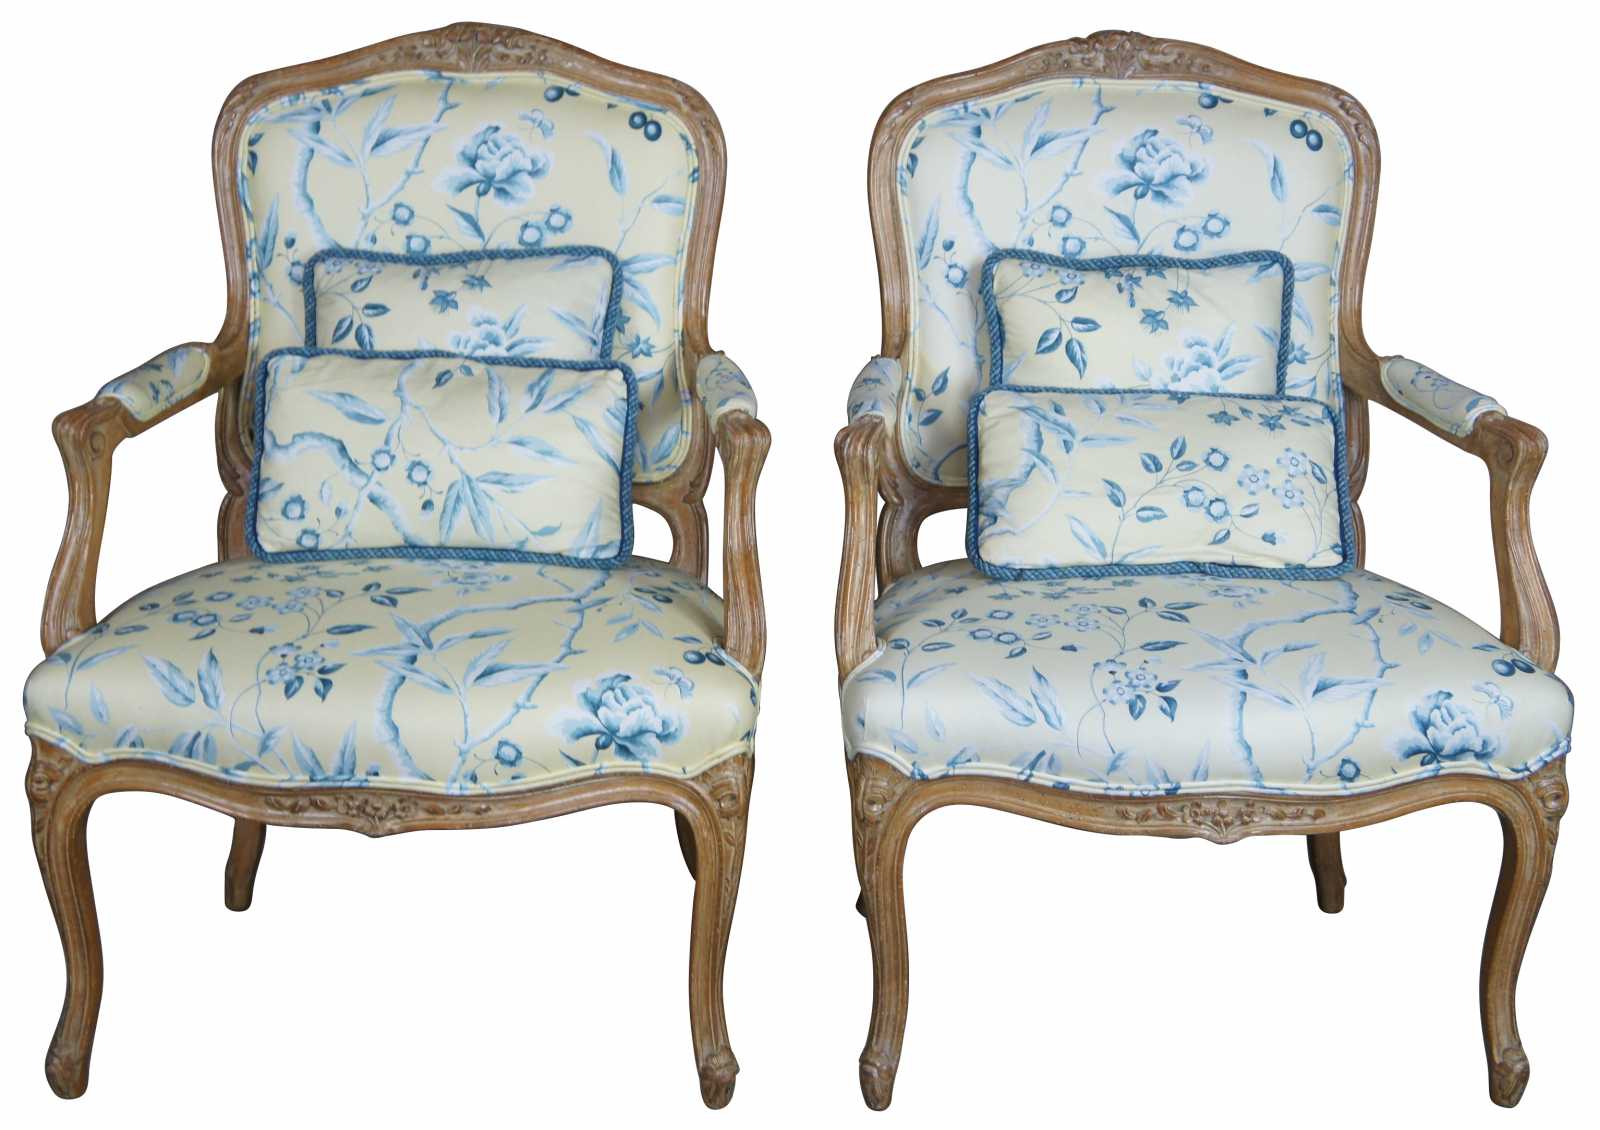 Pair of Louis XV provincial style armchairs